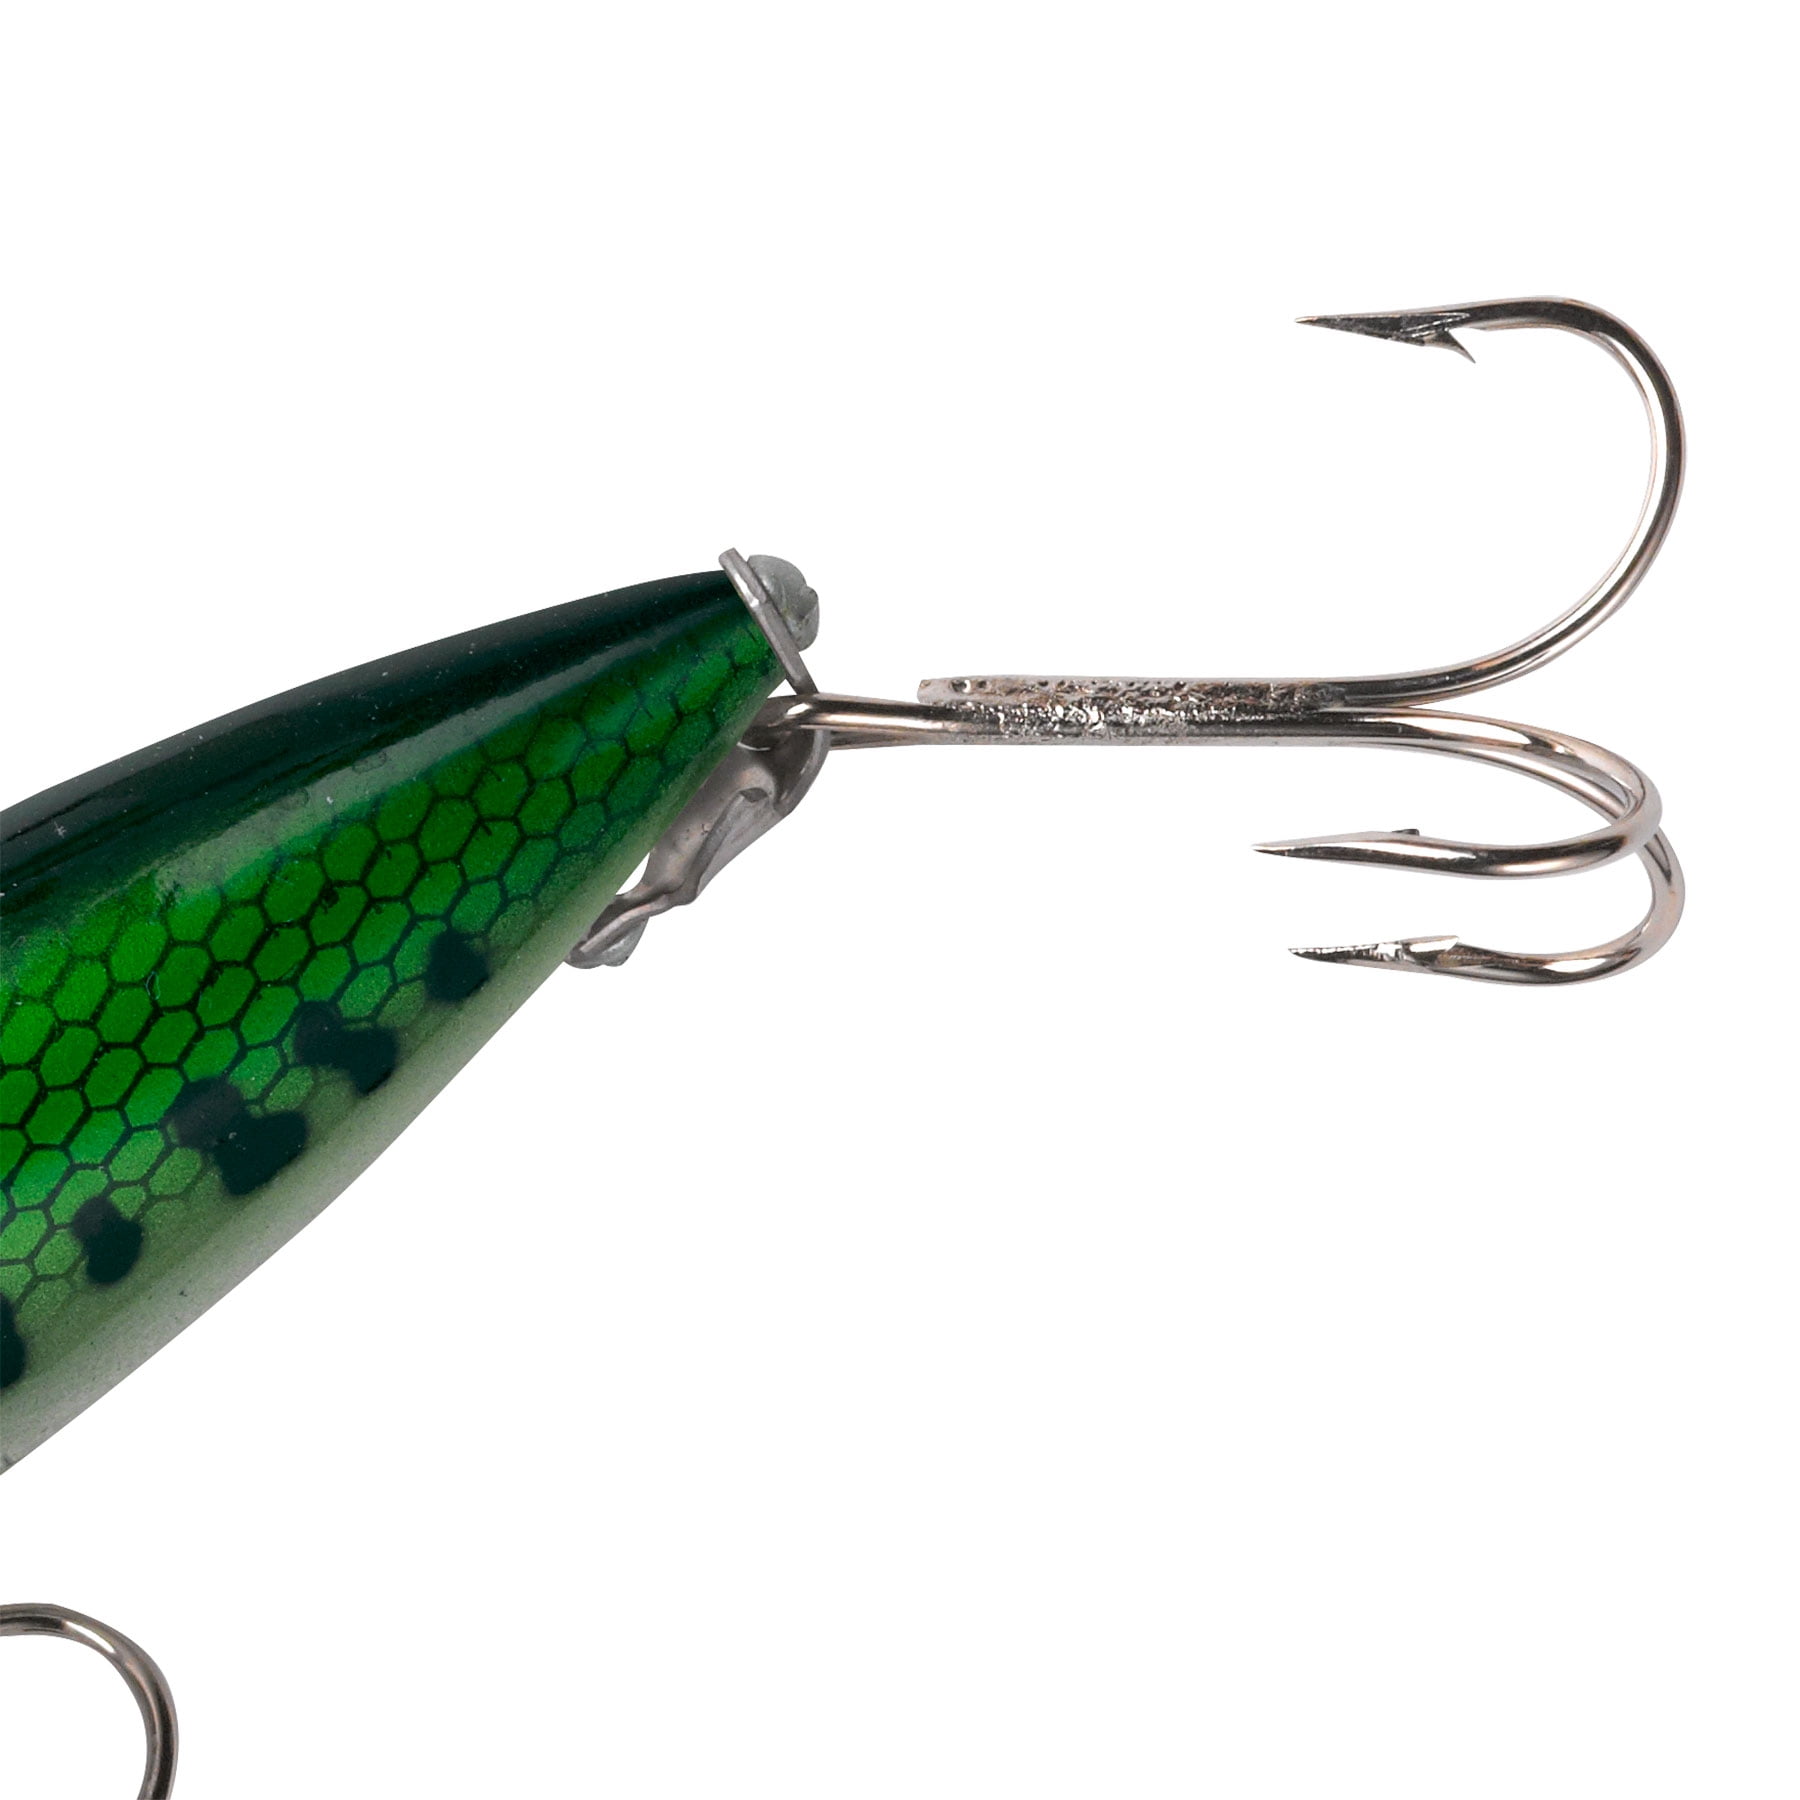 Fishing Lures for sale in Ceres, New York